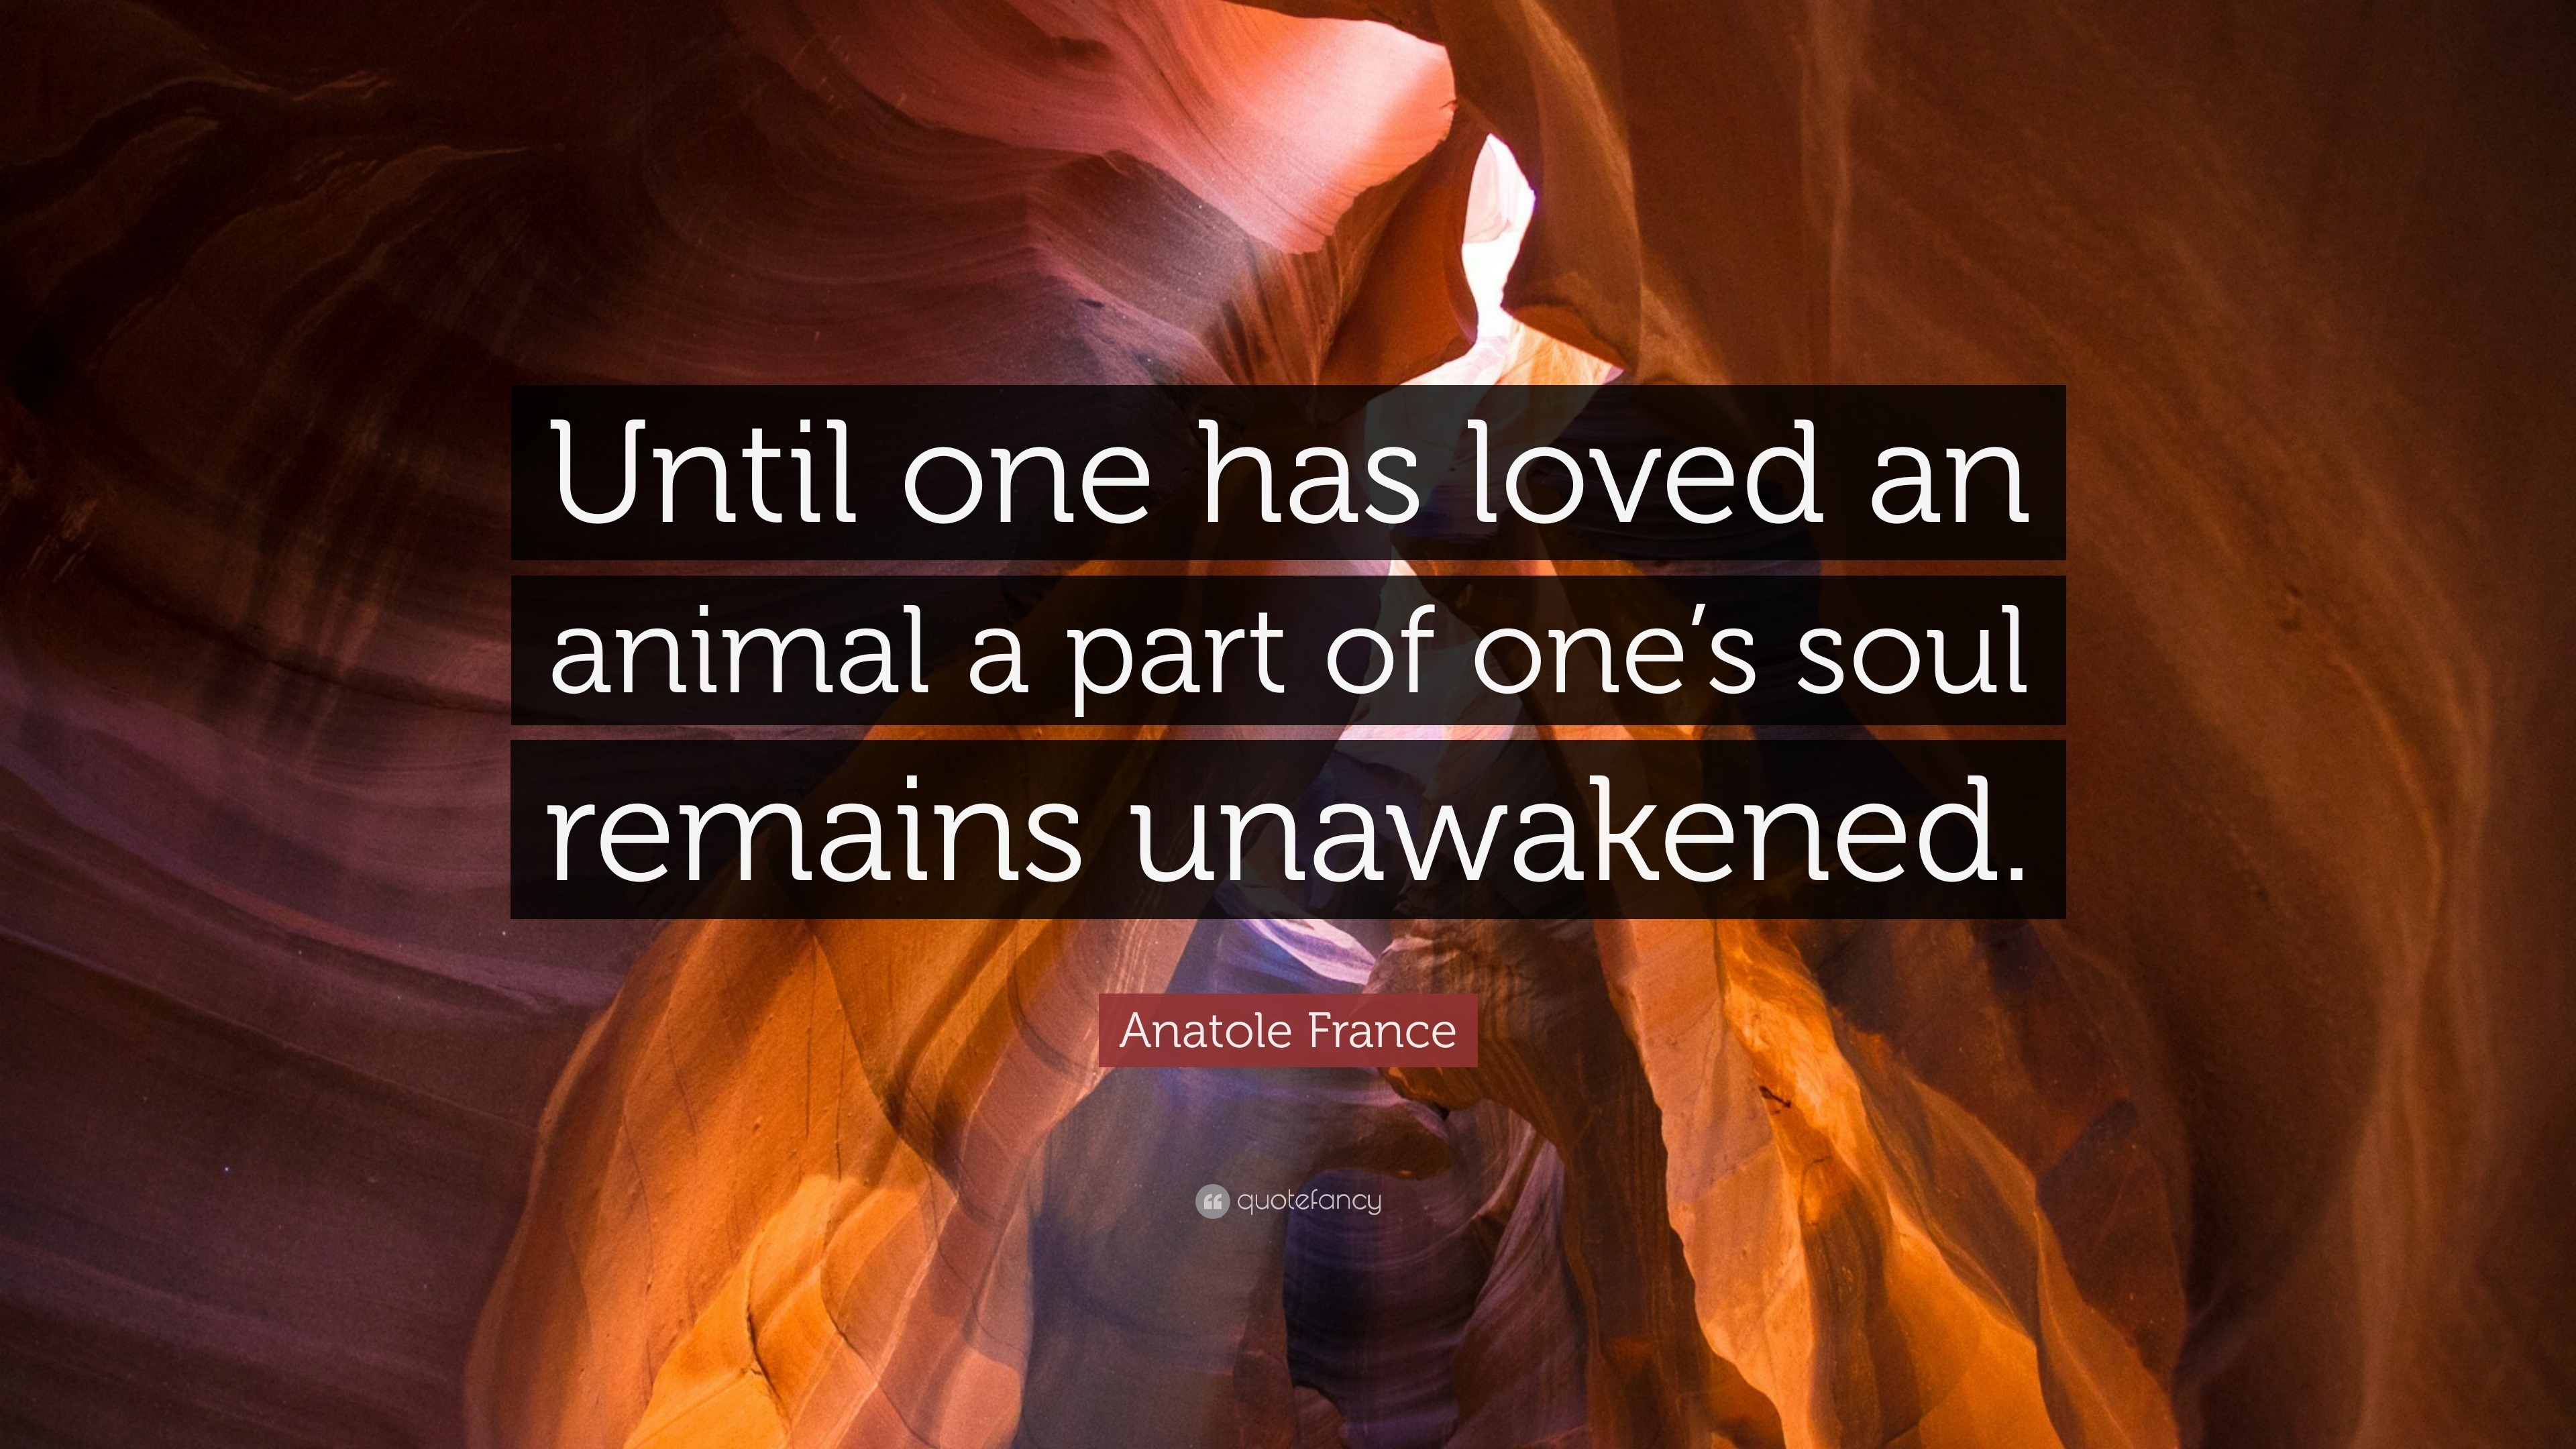 Anatole France Quote: "Until one has loved an animal a part of one's soul remains unawakened ...